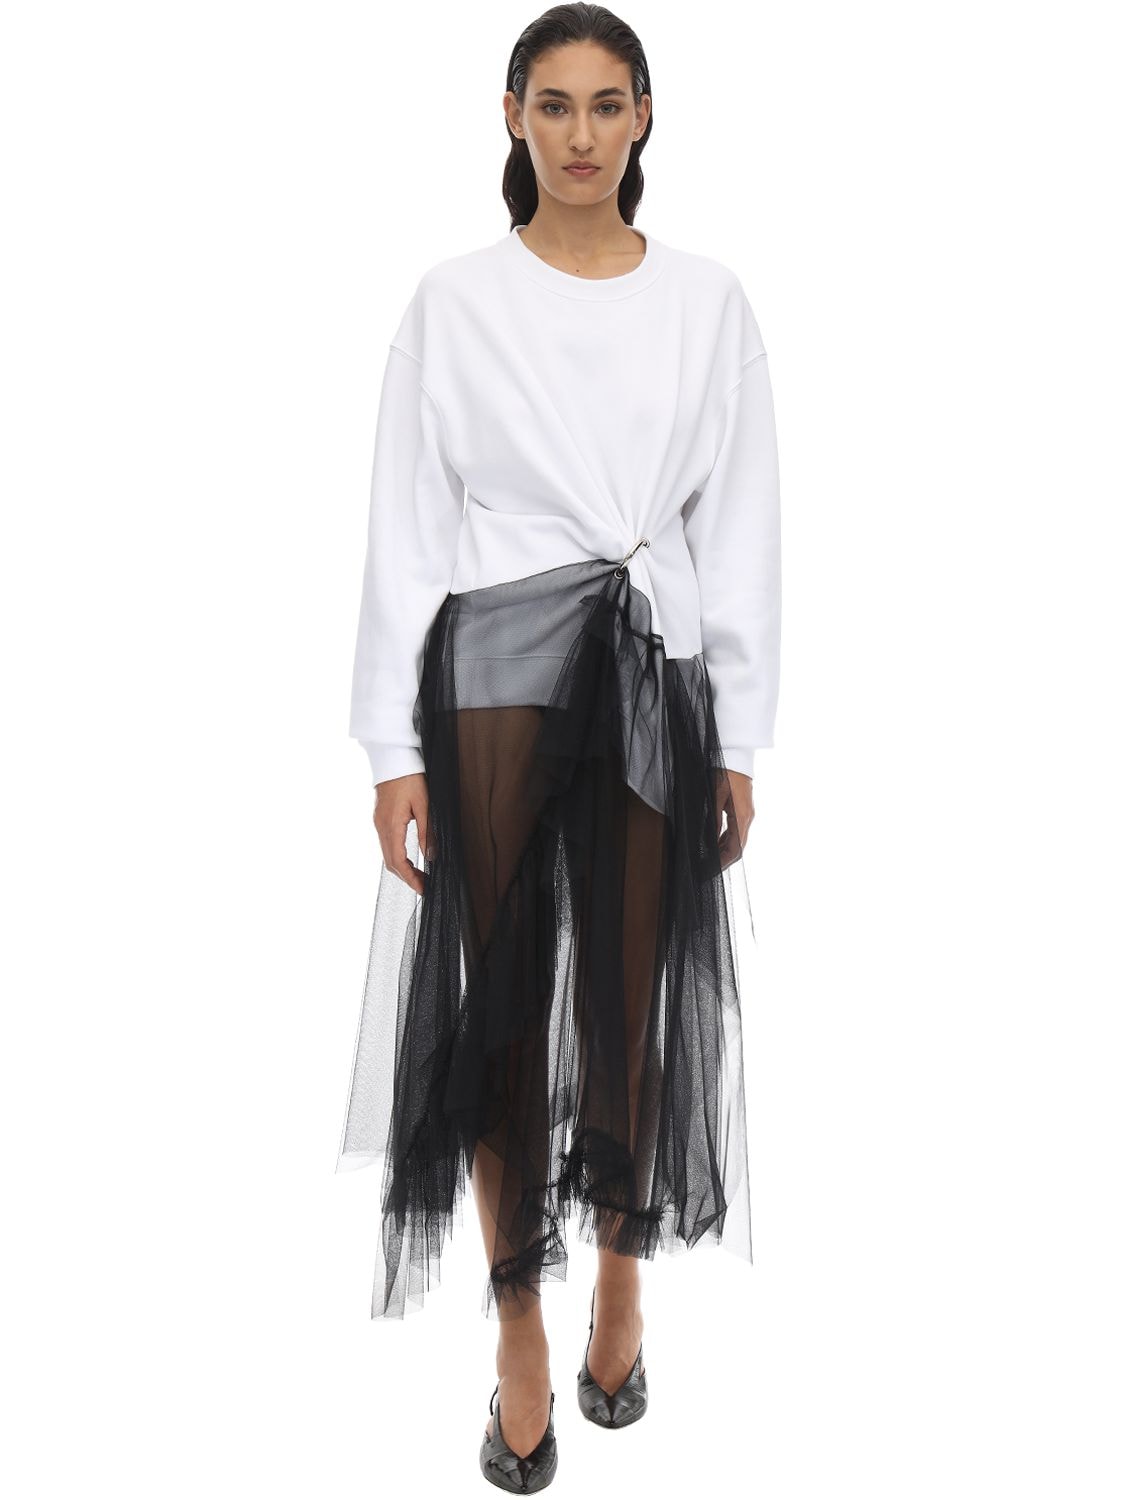 Act N°1 Buckled Cotton Sweatshirt & Tulle Dress In White